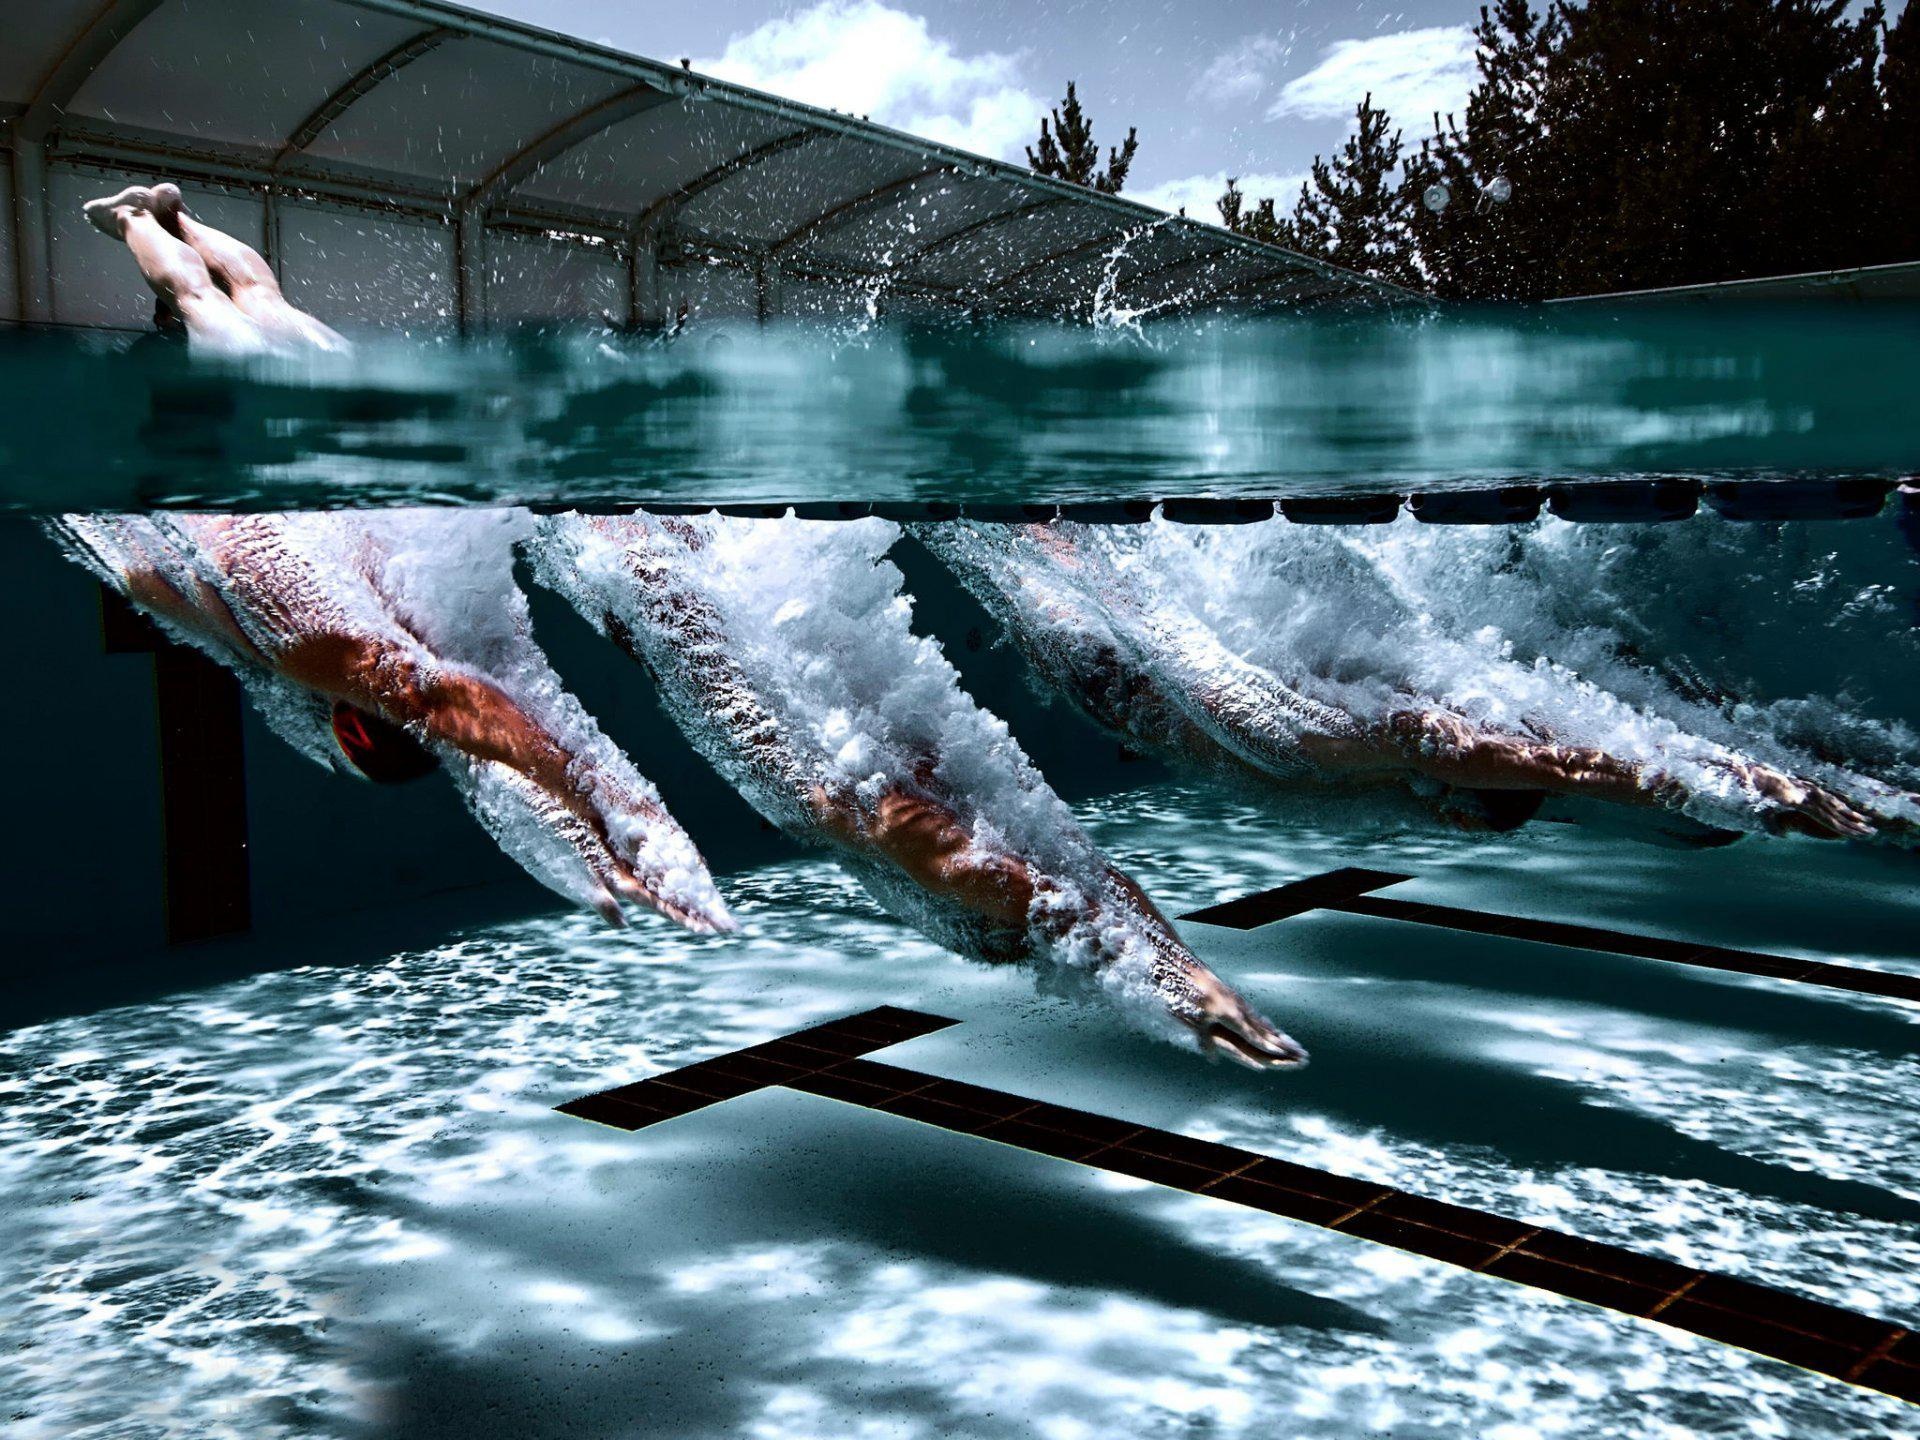 Swimming: An underwater moment after a jump, The starting point of a water race sports discipline. 1920x1440 HD Wallpaper.